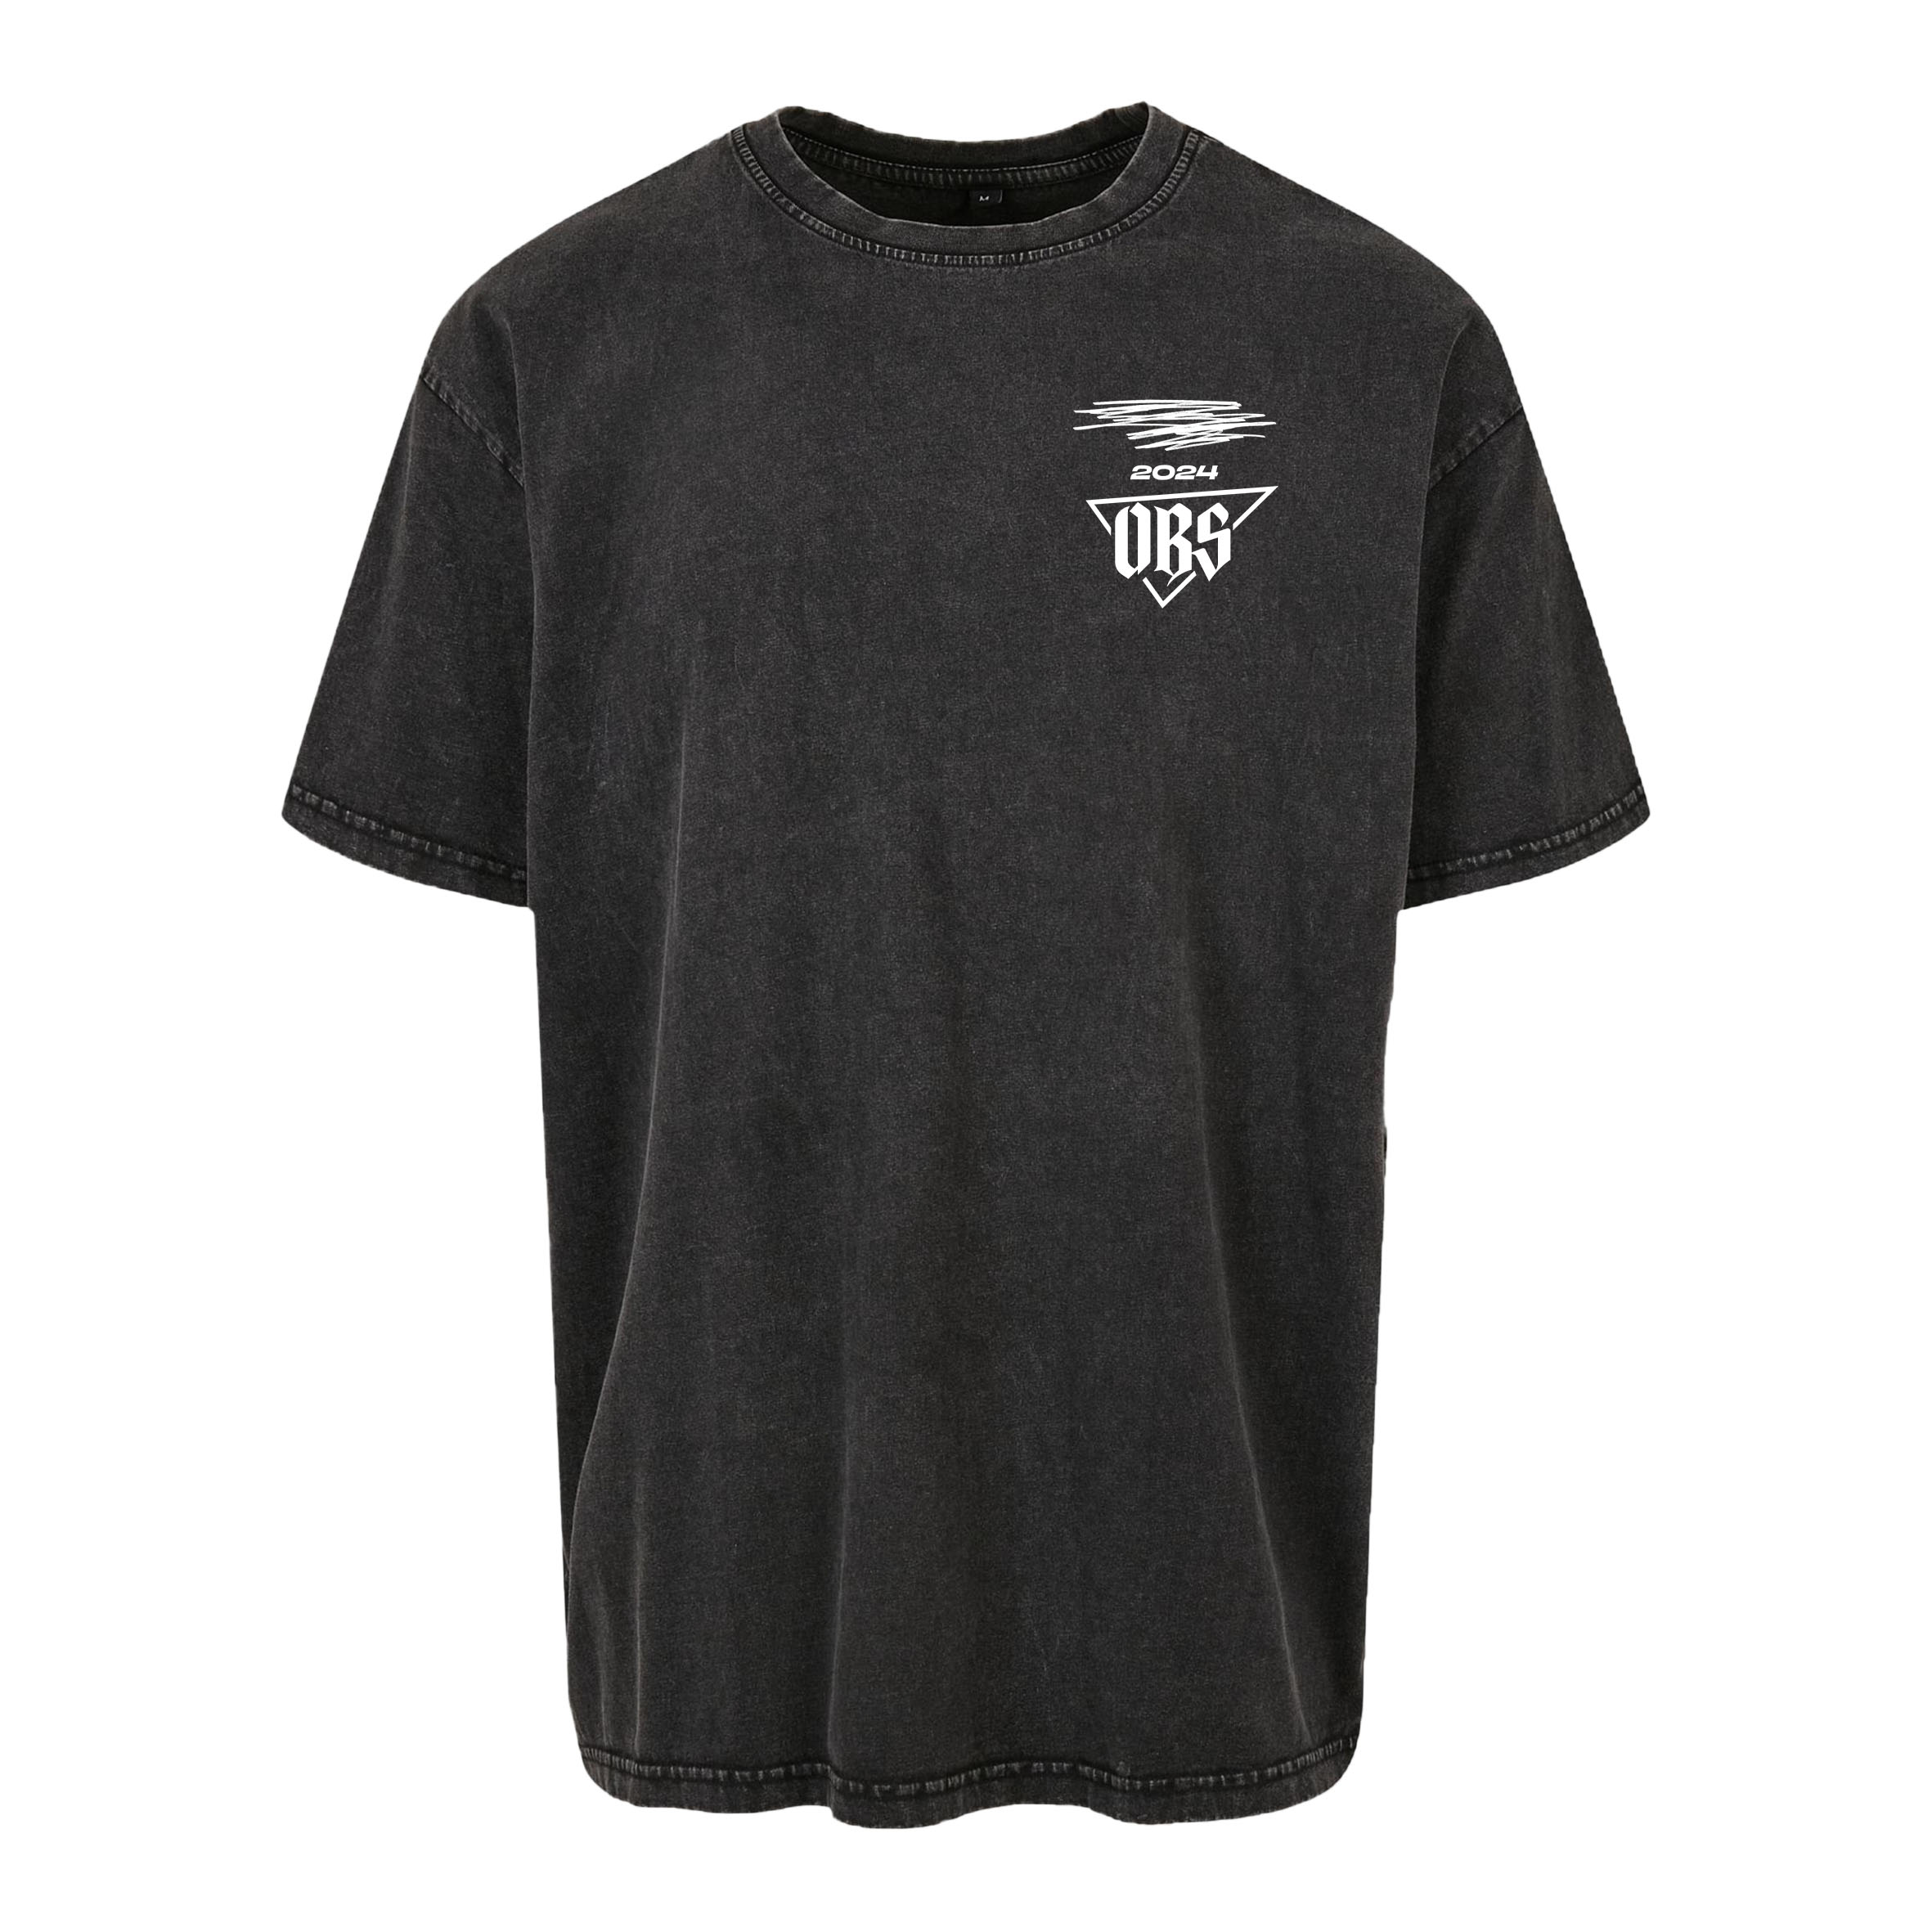 OBS - Created with Heat - Shirt - black